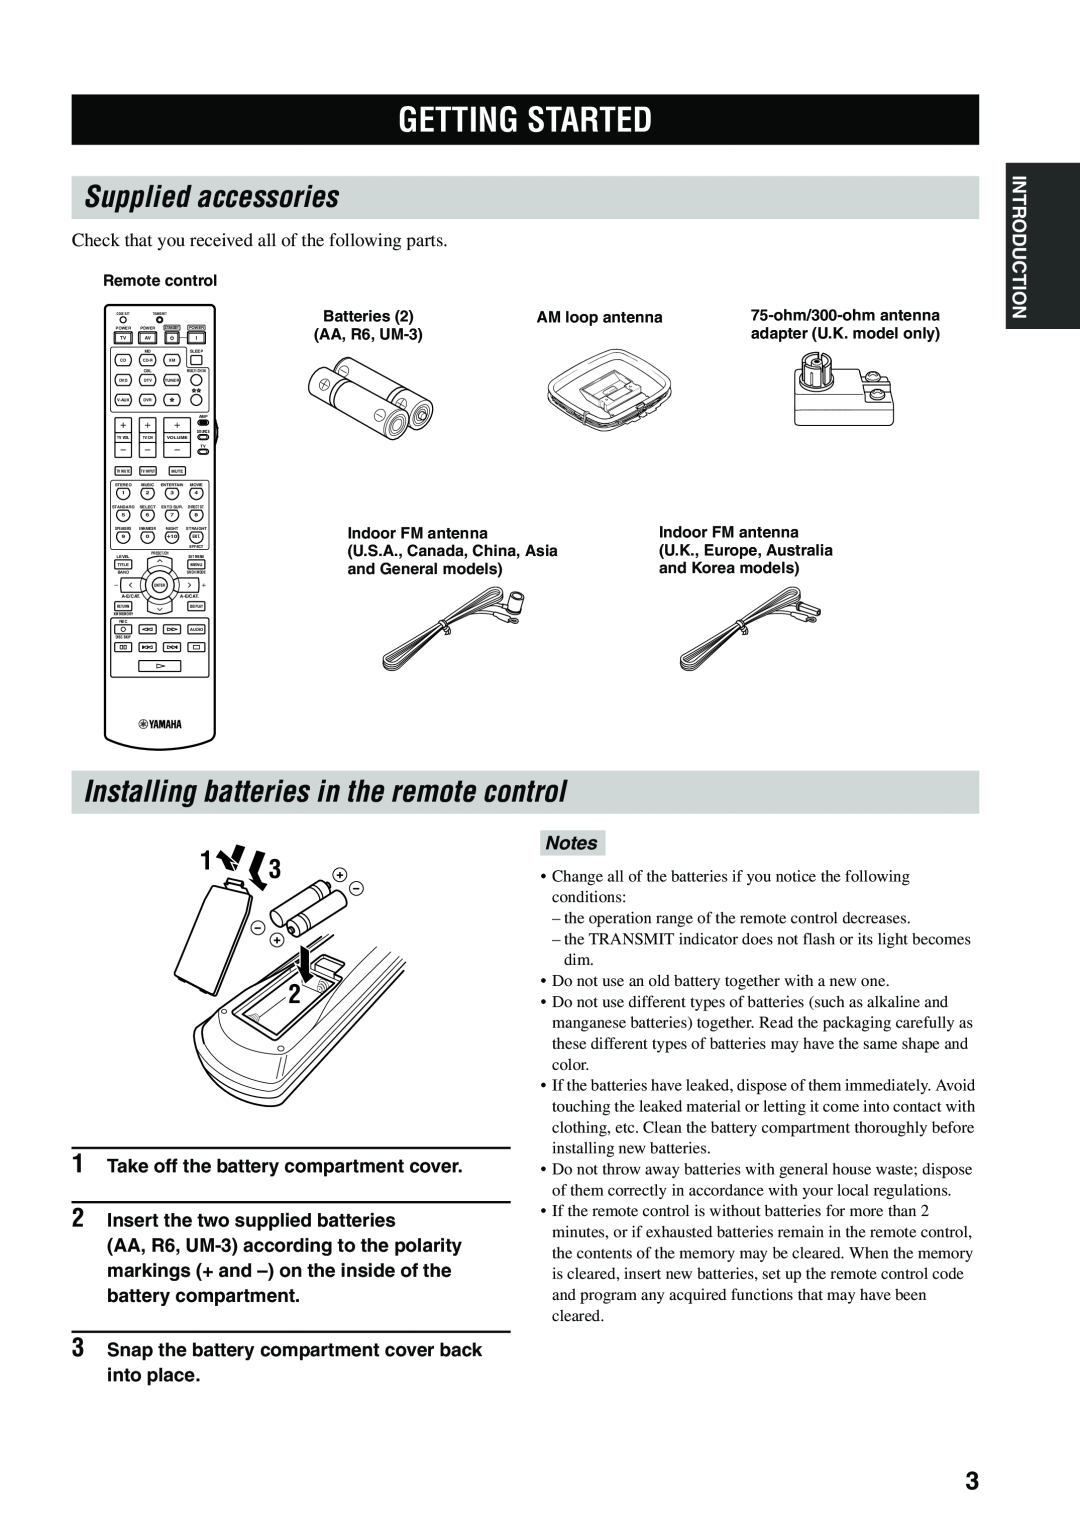 Yamaha RX-V559 owner manual Getting Started, Supplied accessories, Installing batteries in the remote control, 13 2, Notes 